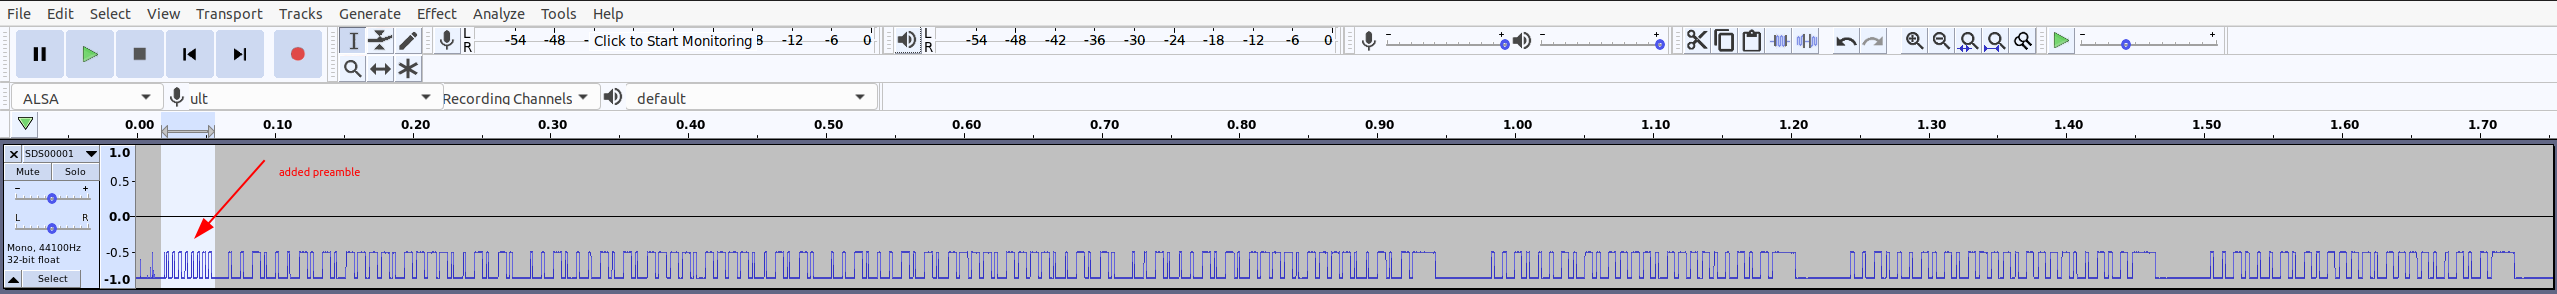 Imgage shows imported wav file from the oscilloscope in Audacity plus the added preable representing 10101010.